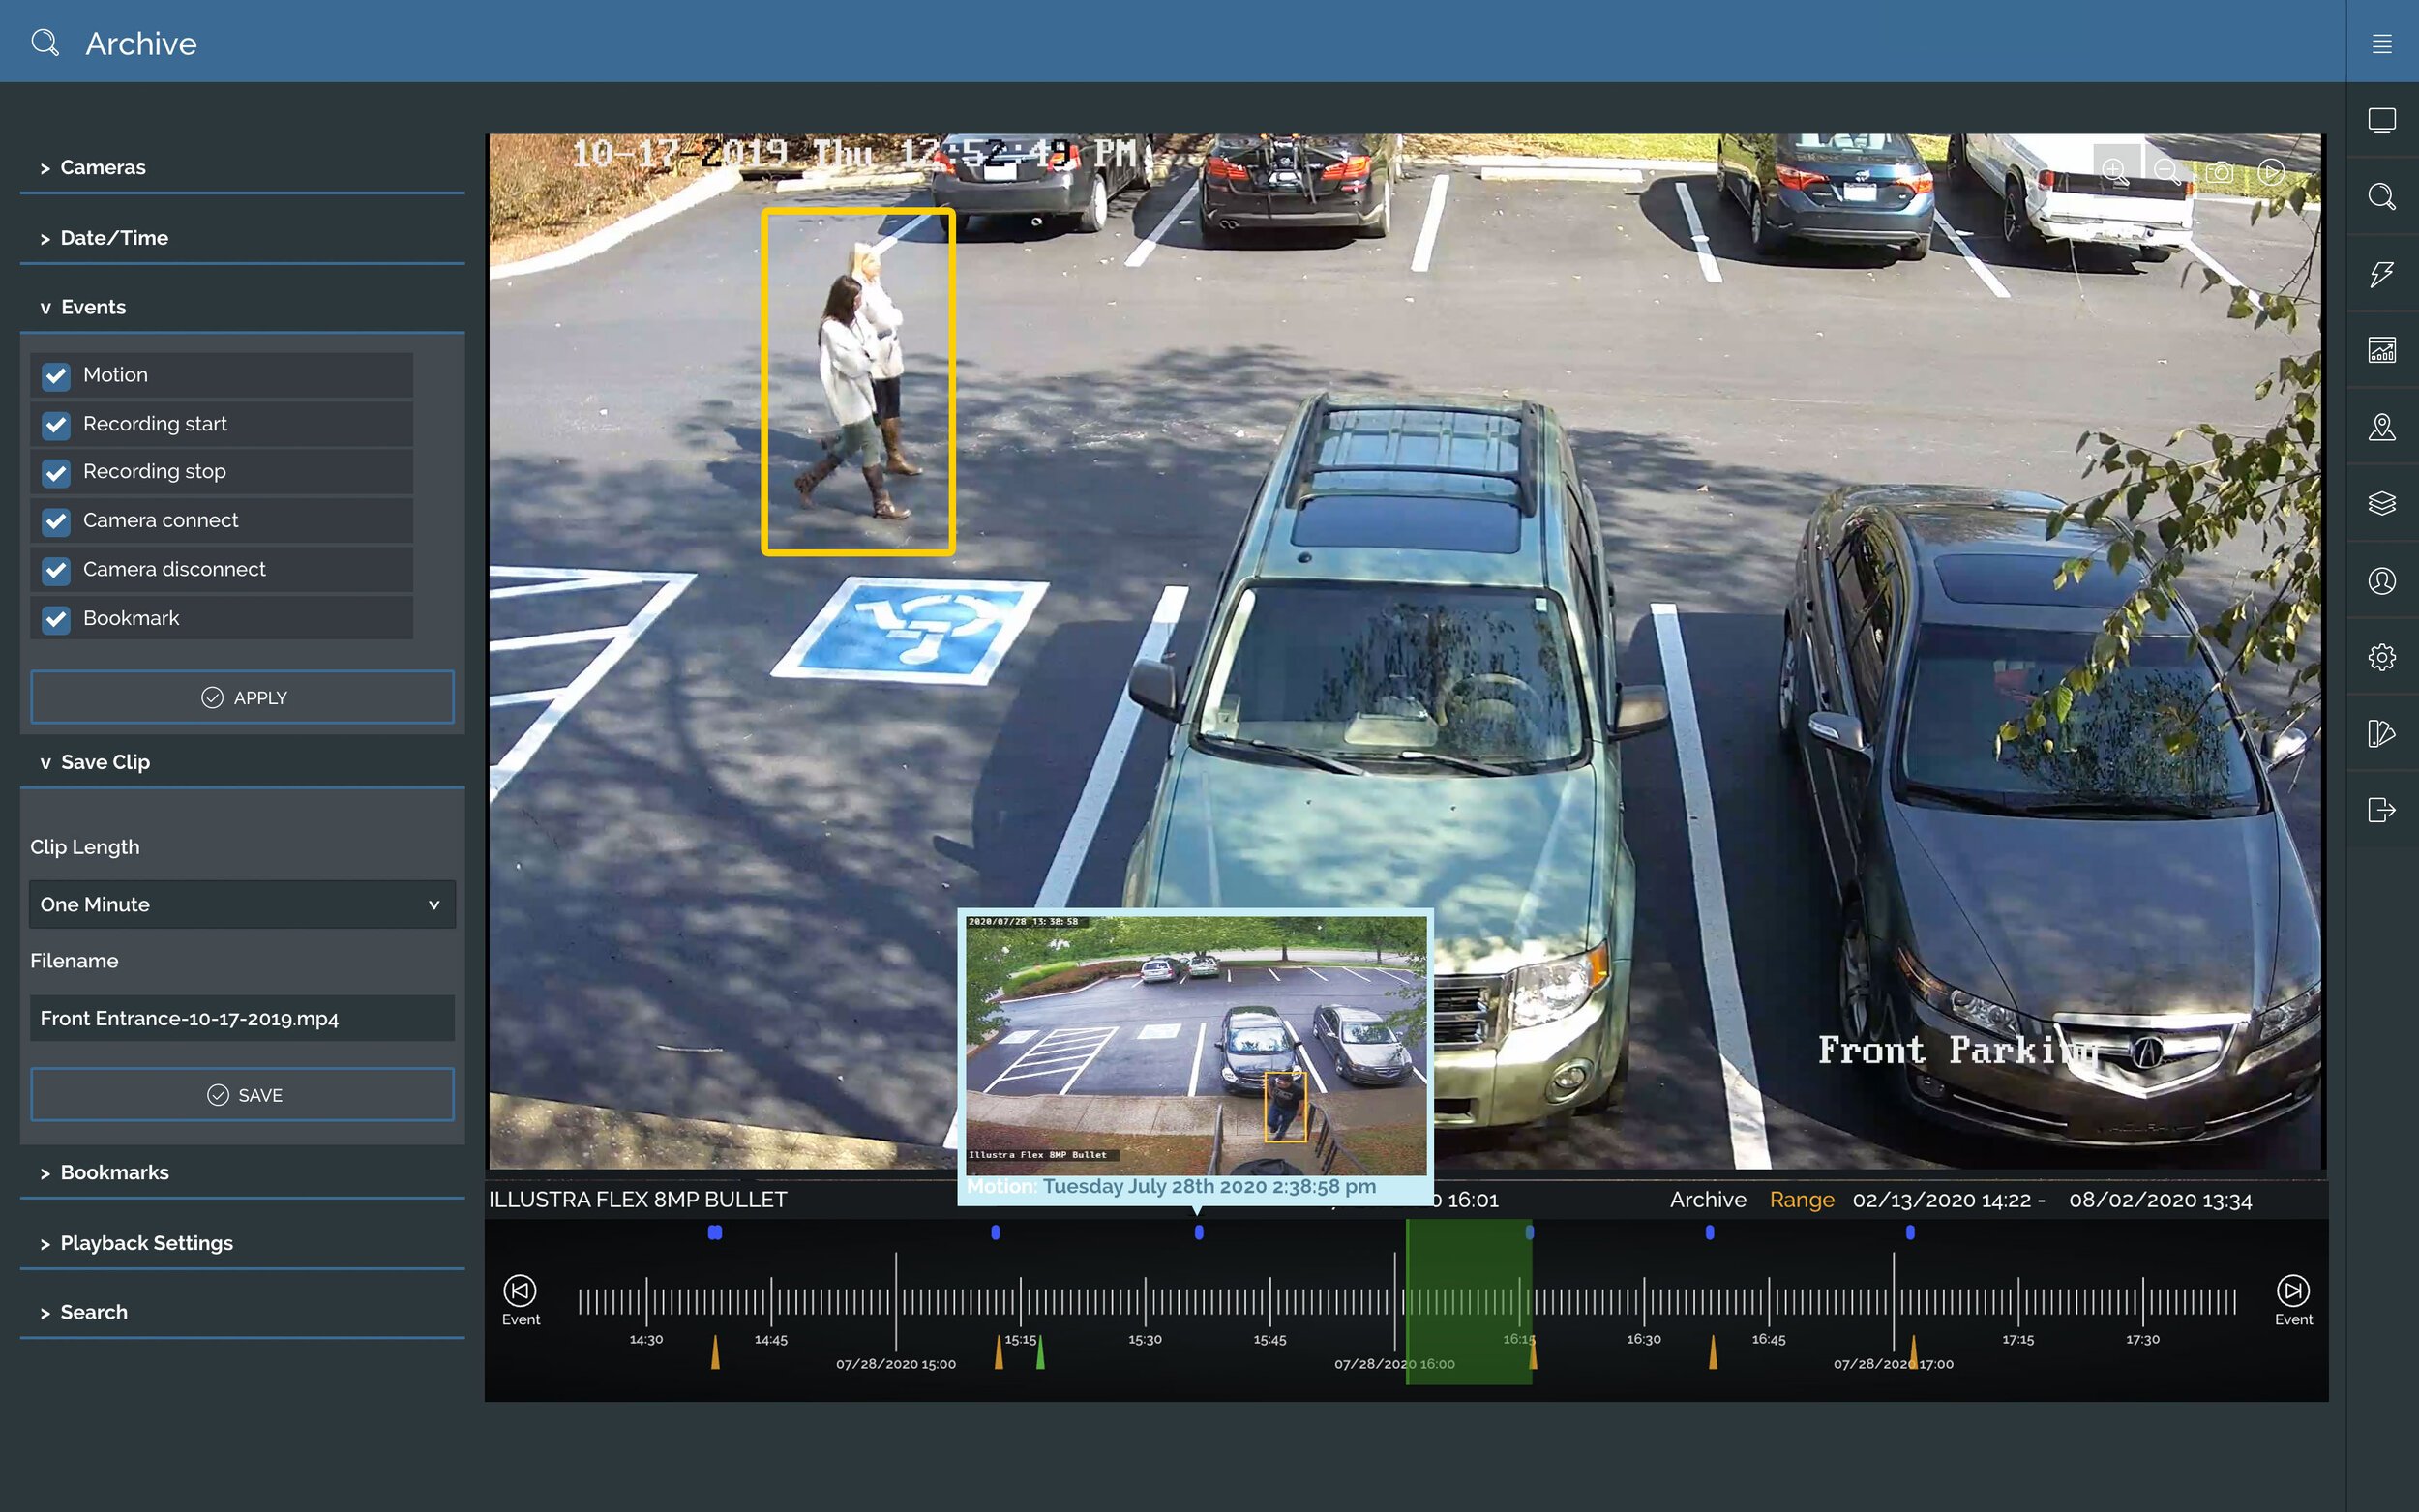 Recorded video search with people detection.